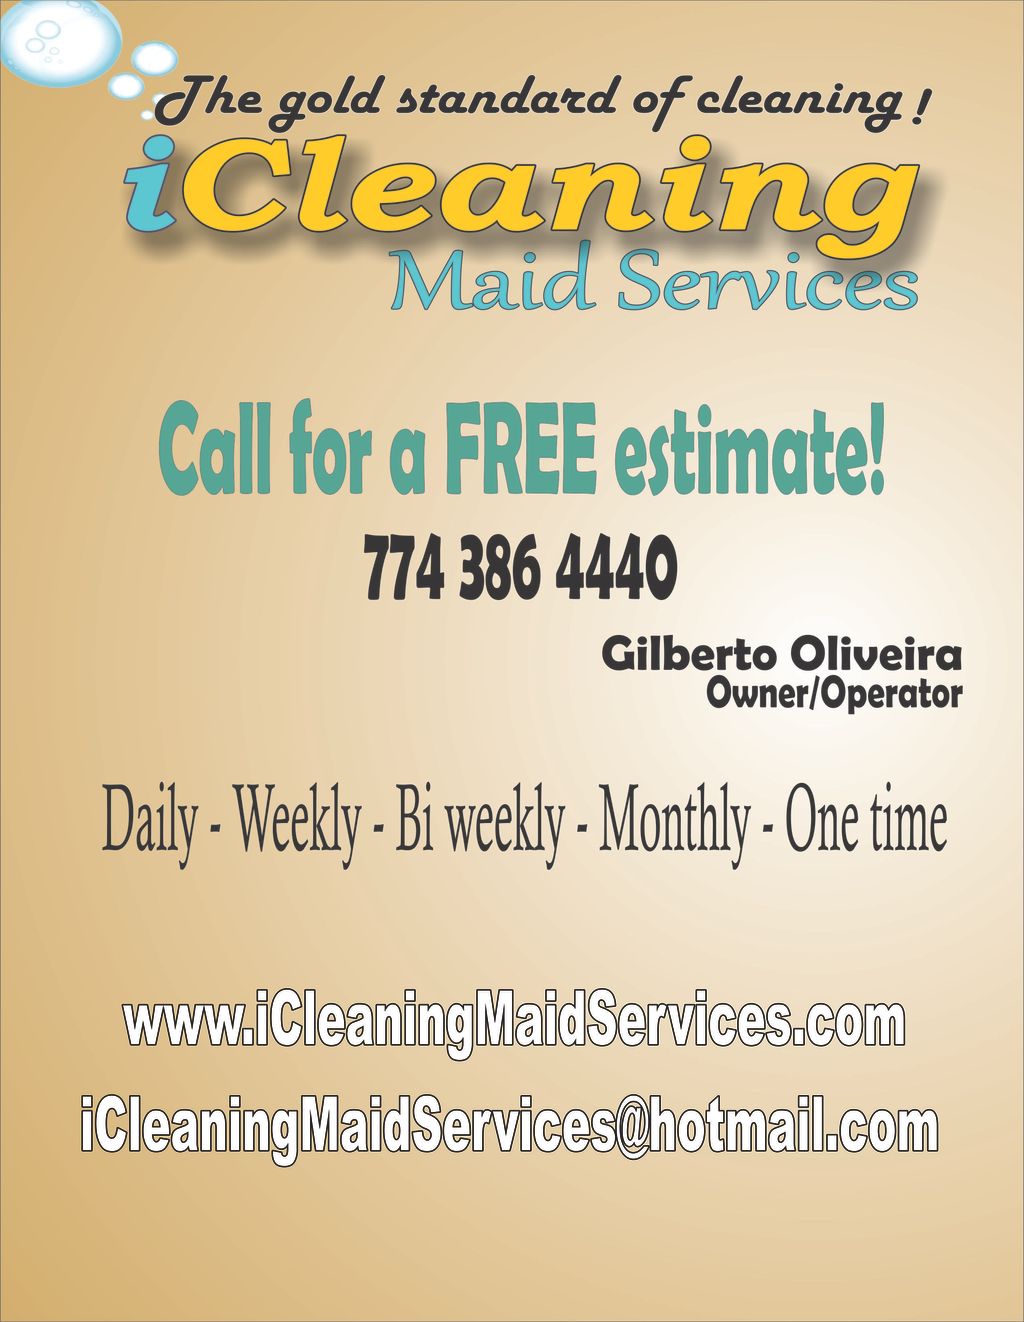 iCleaning Maid Services